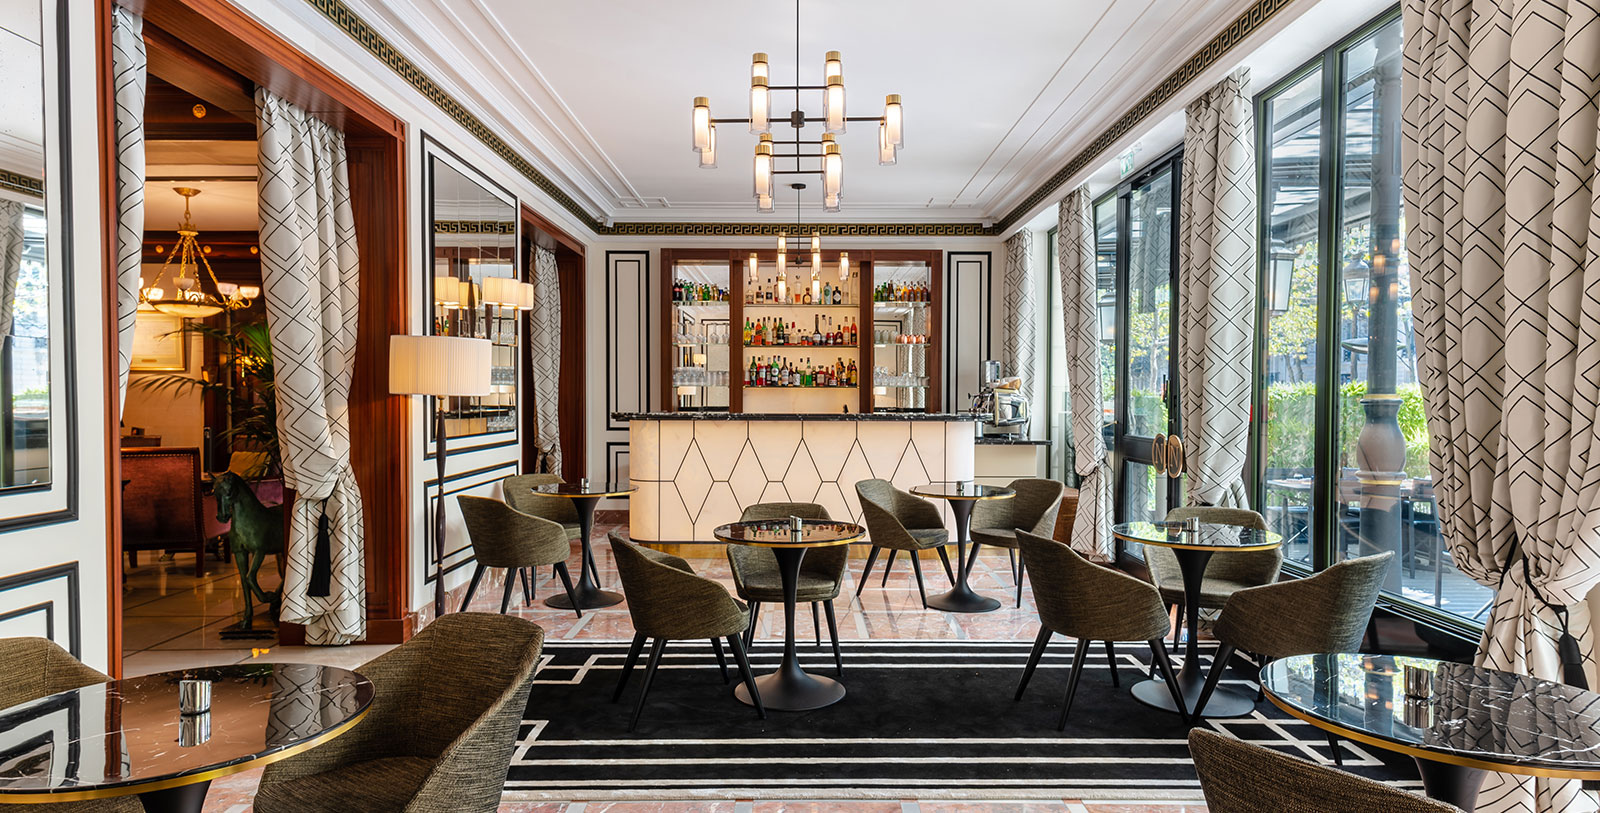 Taste delicious craft cocktails made from premium French spirits at The Bar 1807.